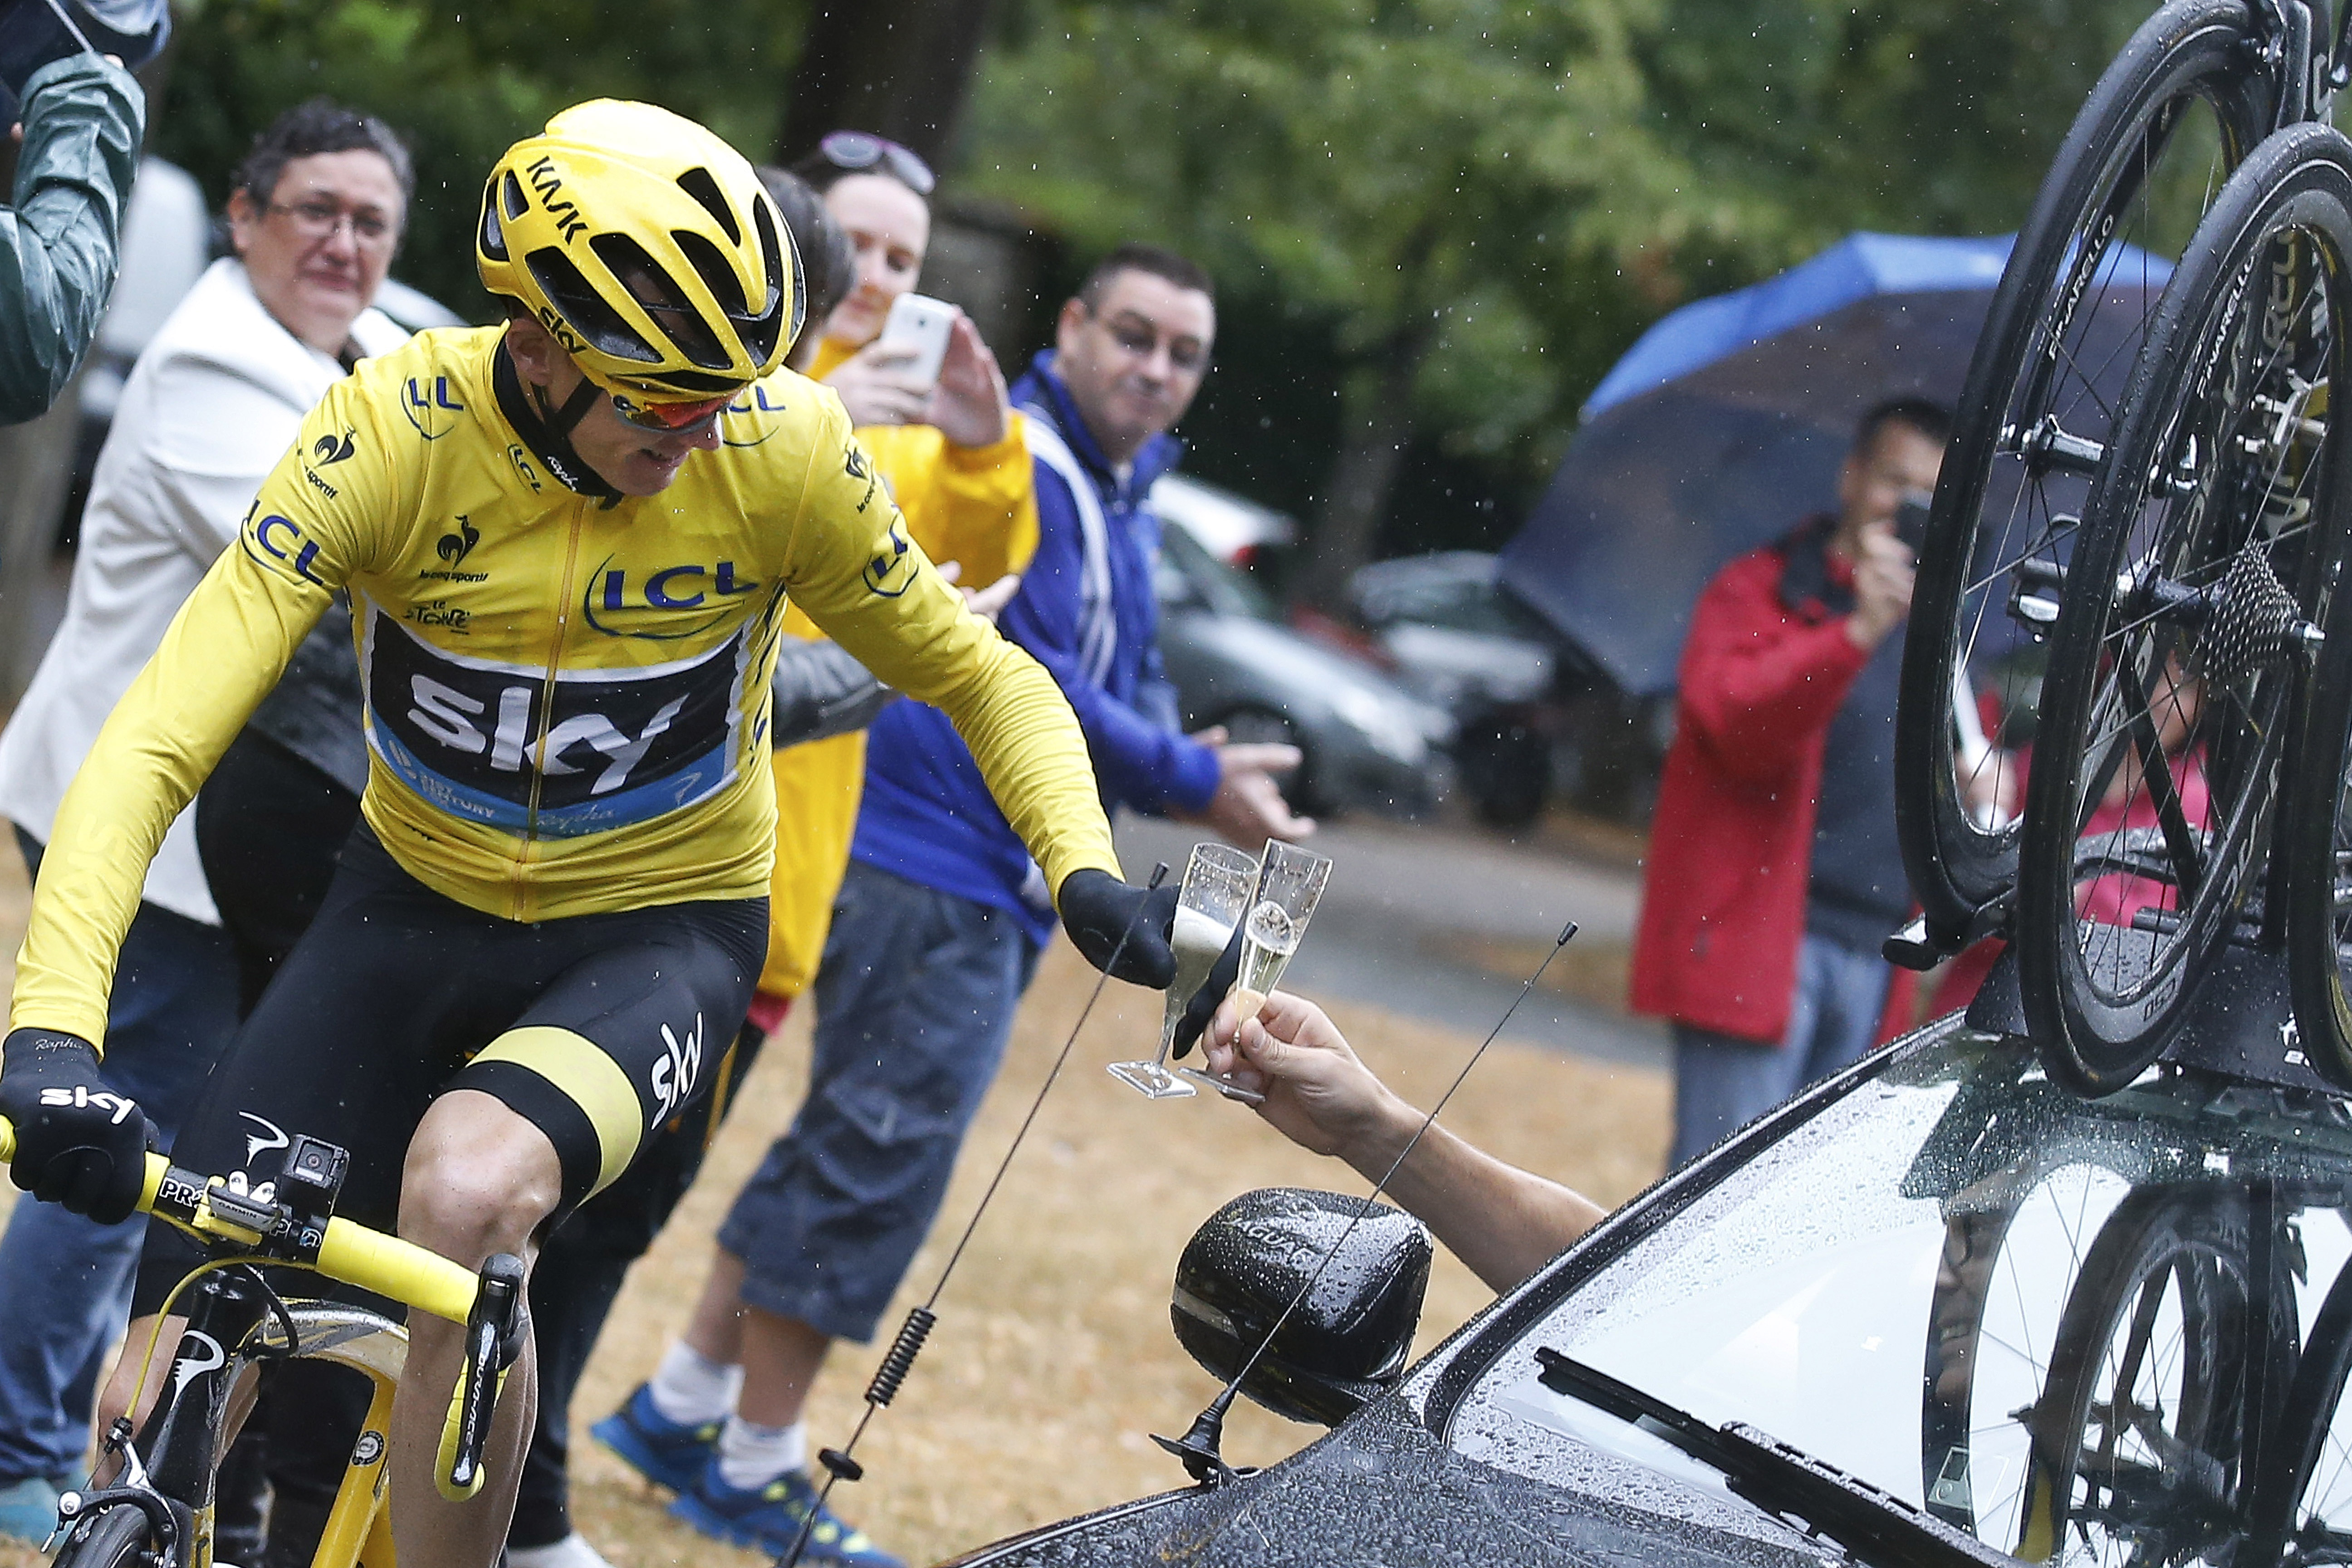 Britain's Chris Froome enjoys the traditional toast of champagne on the last stage of the Tour de France into Paris on Sunday. Photos: AP